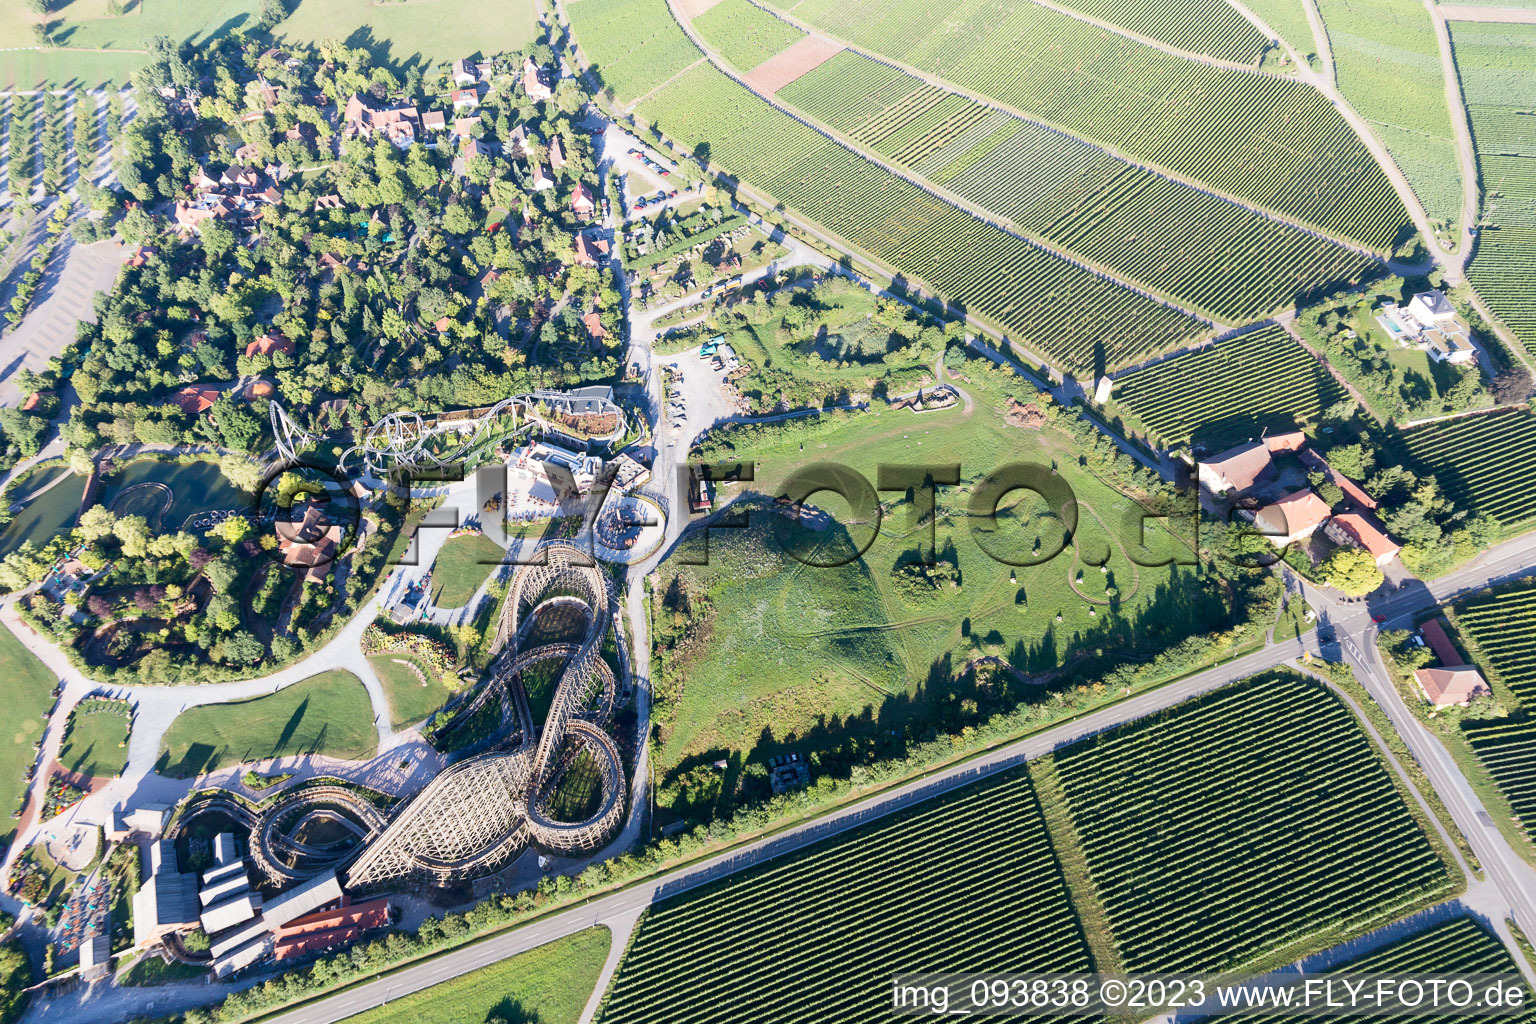 Bird's eye view of Tripsdrill adventure park in Cleebronn in the state Baden-Wuerttemberg, Germany